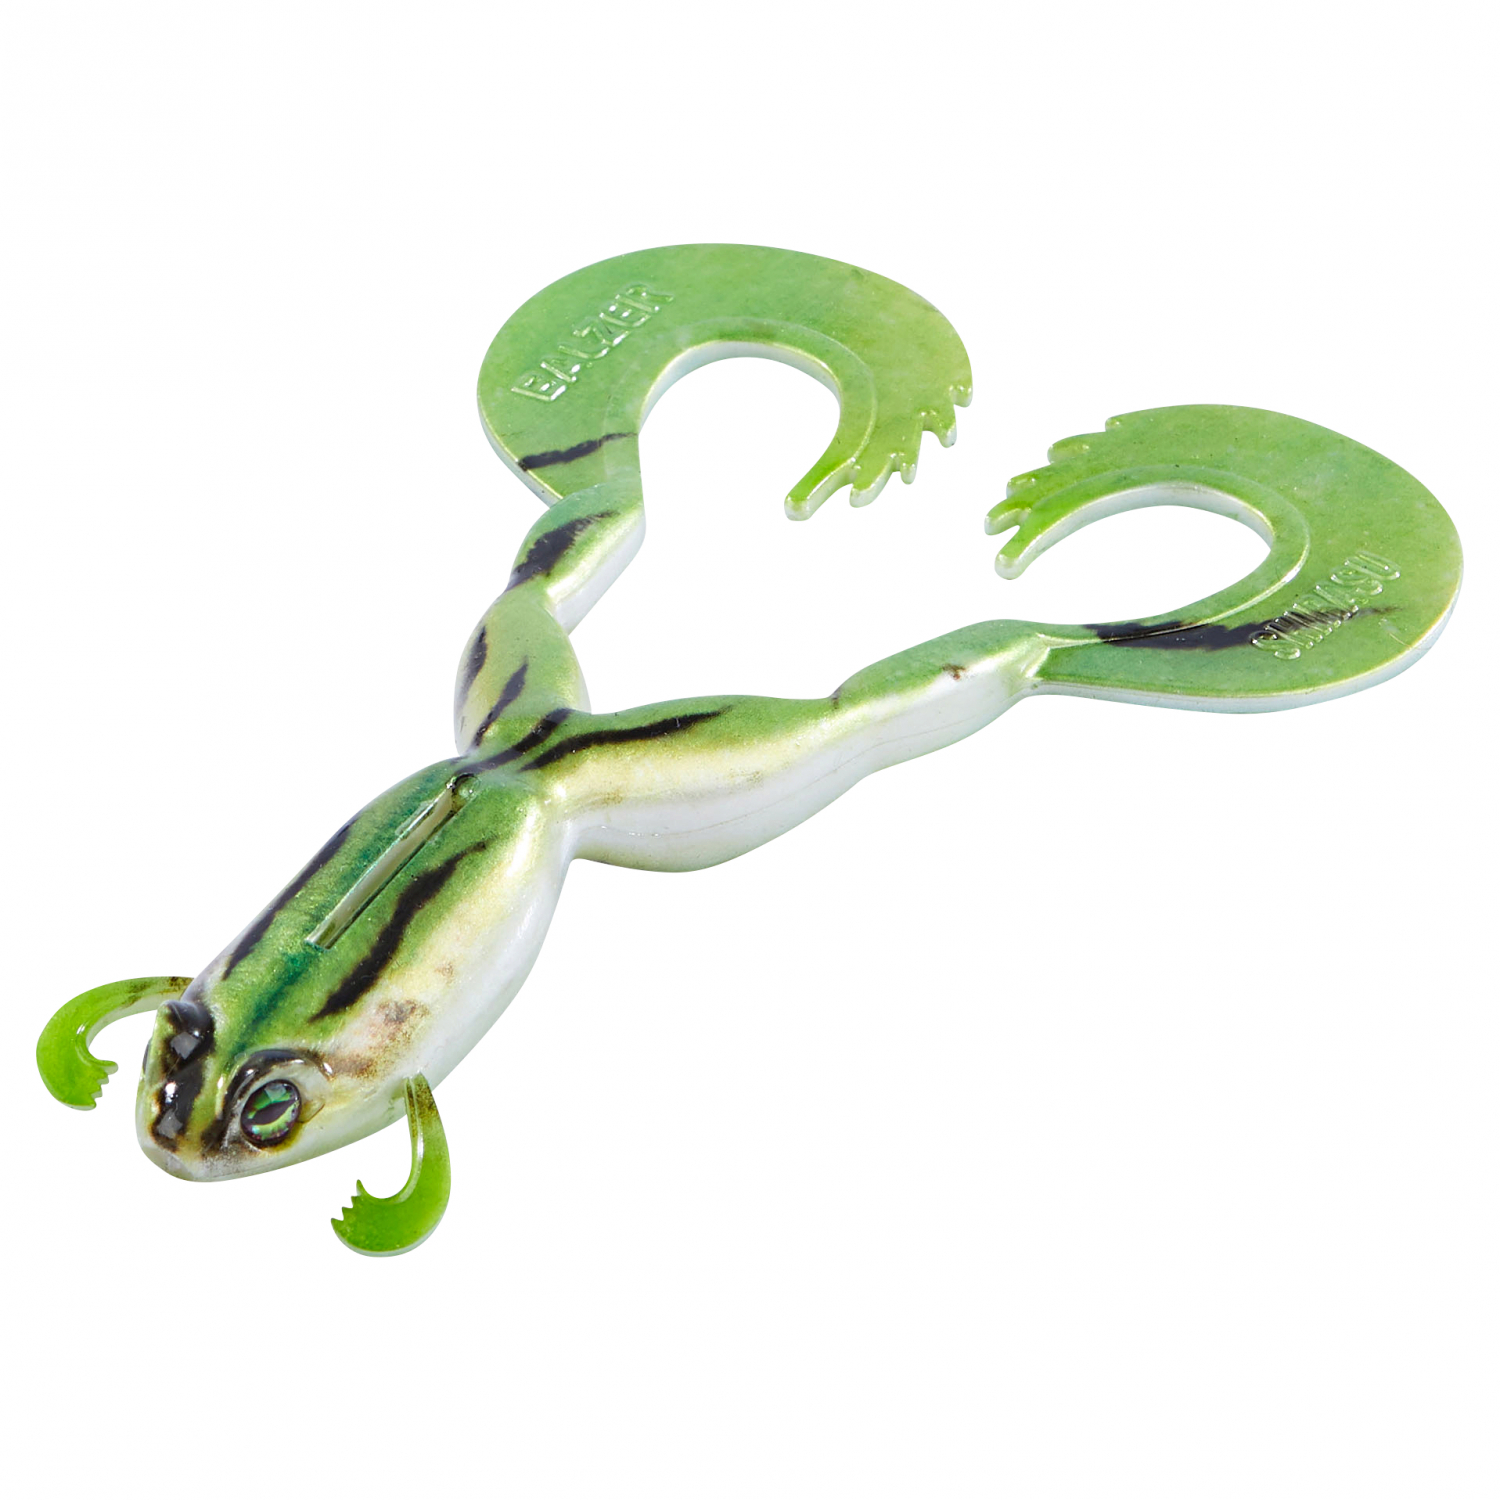 Shirasu Rubber Frogs Clone Frog (Tree Frog) at low prices